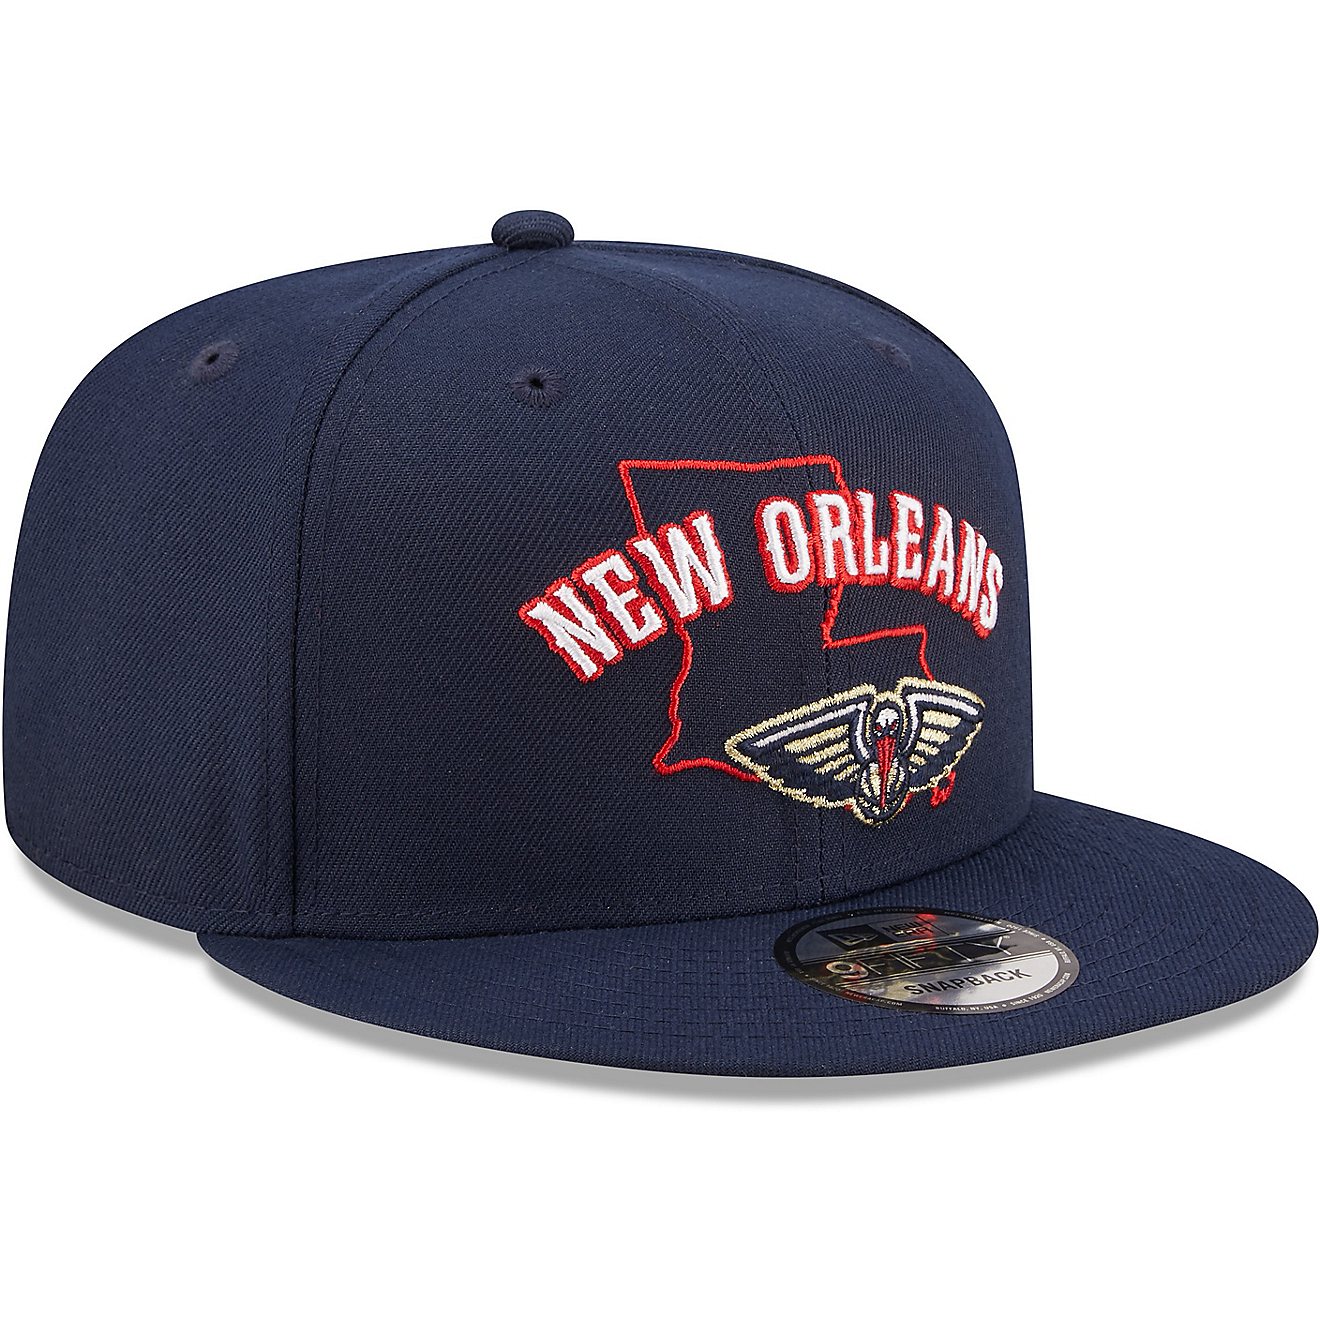 New Era Men's New Orleans Pelicans Logo State 9FIFTY Cap                                                                         - view number 1